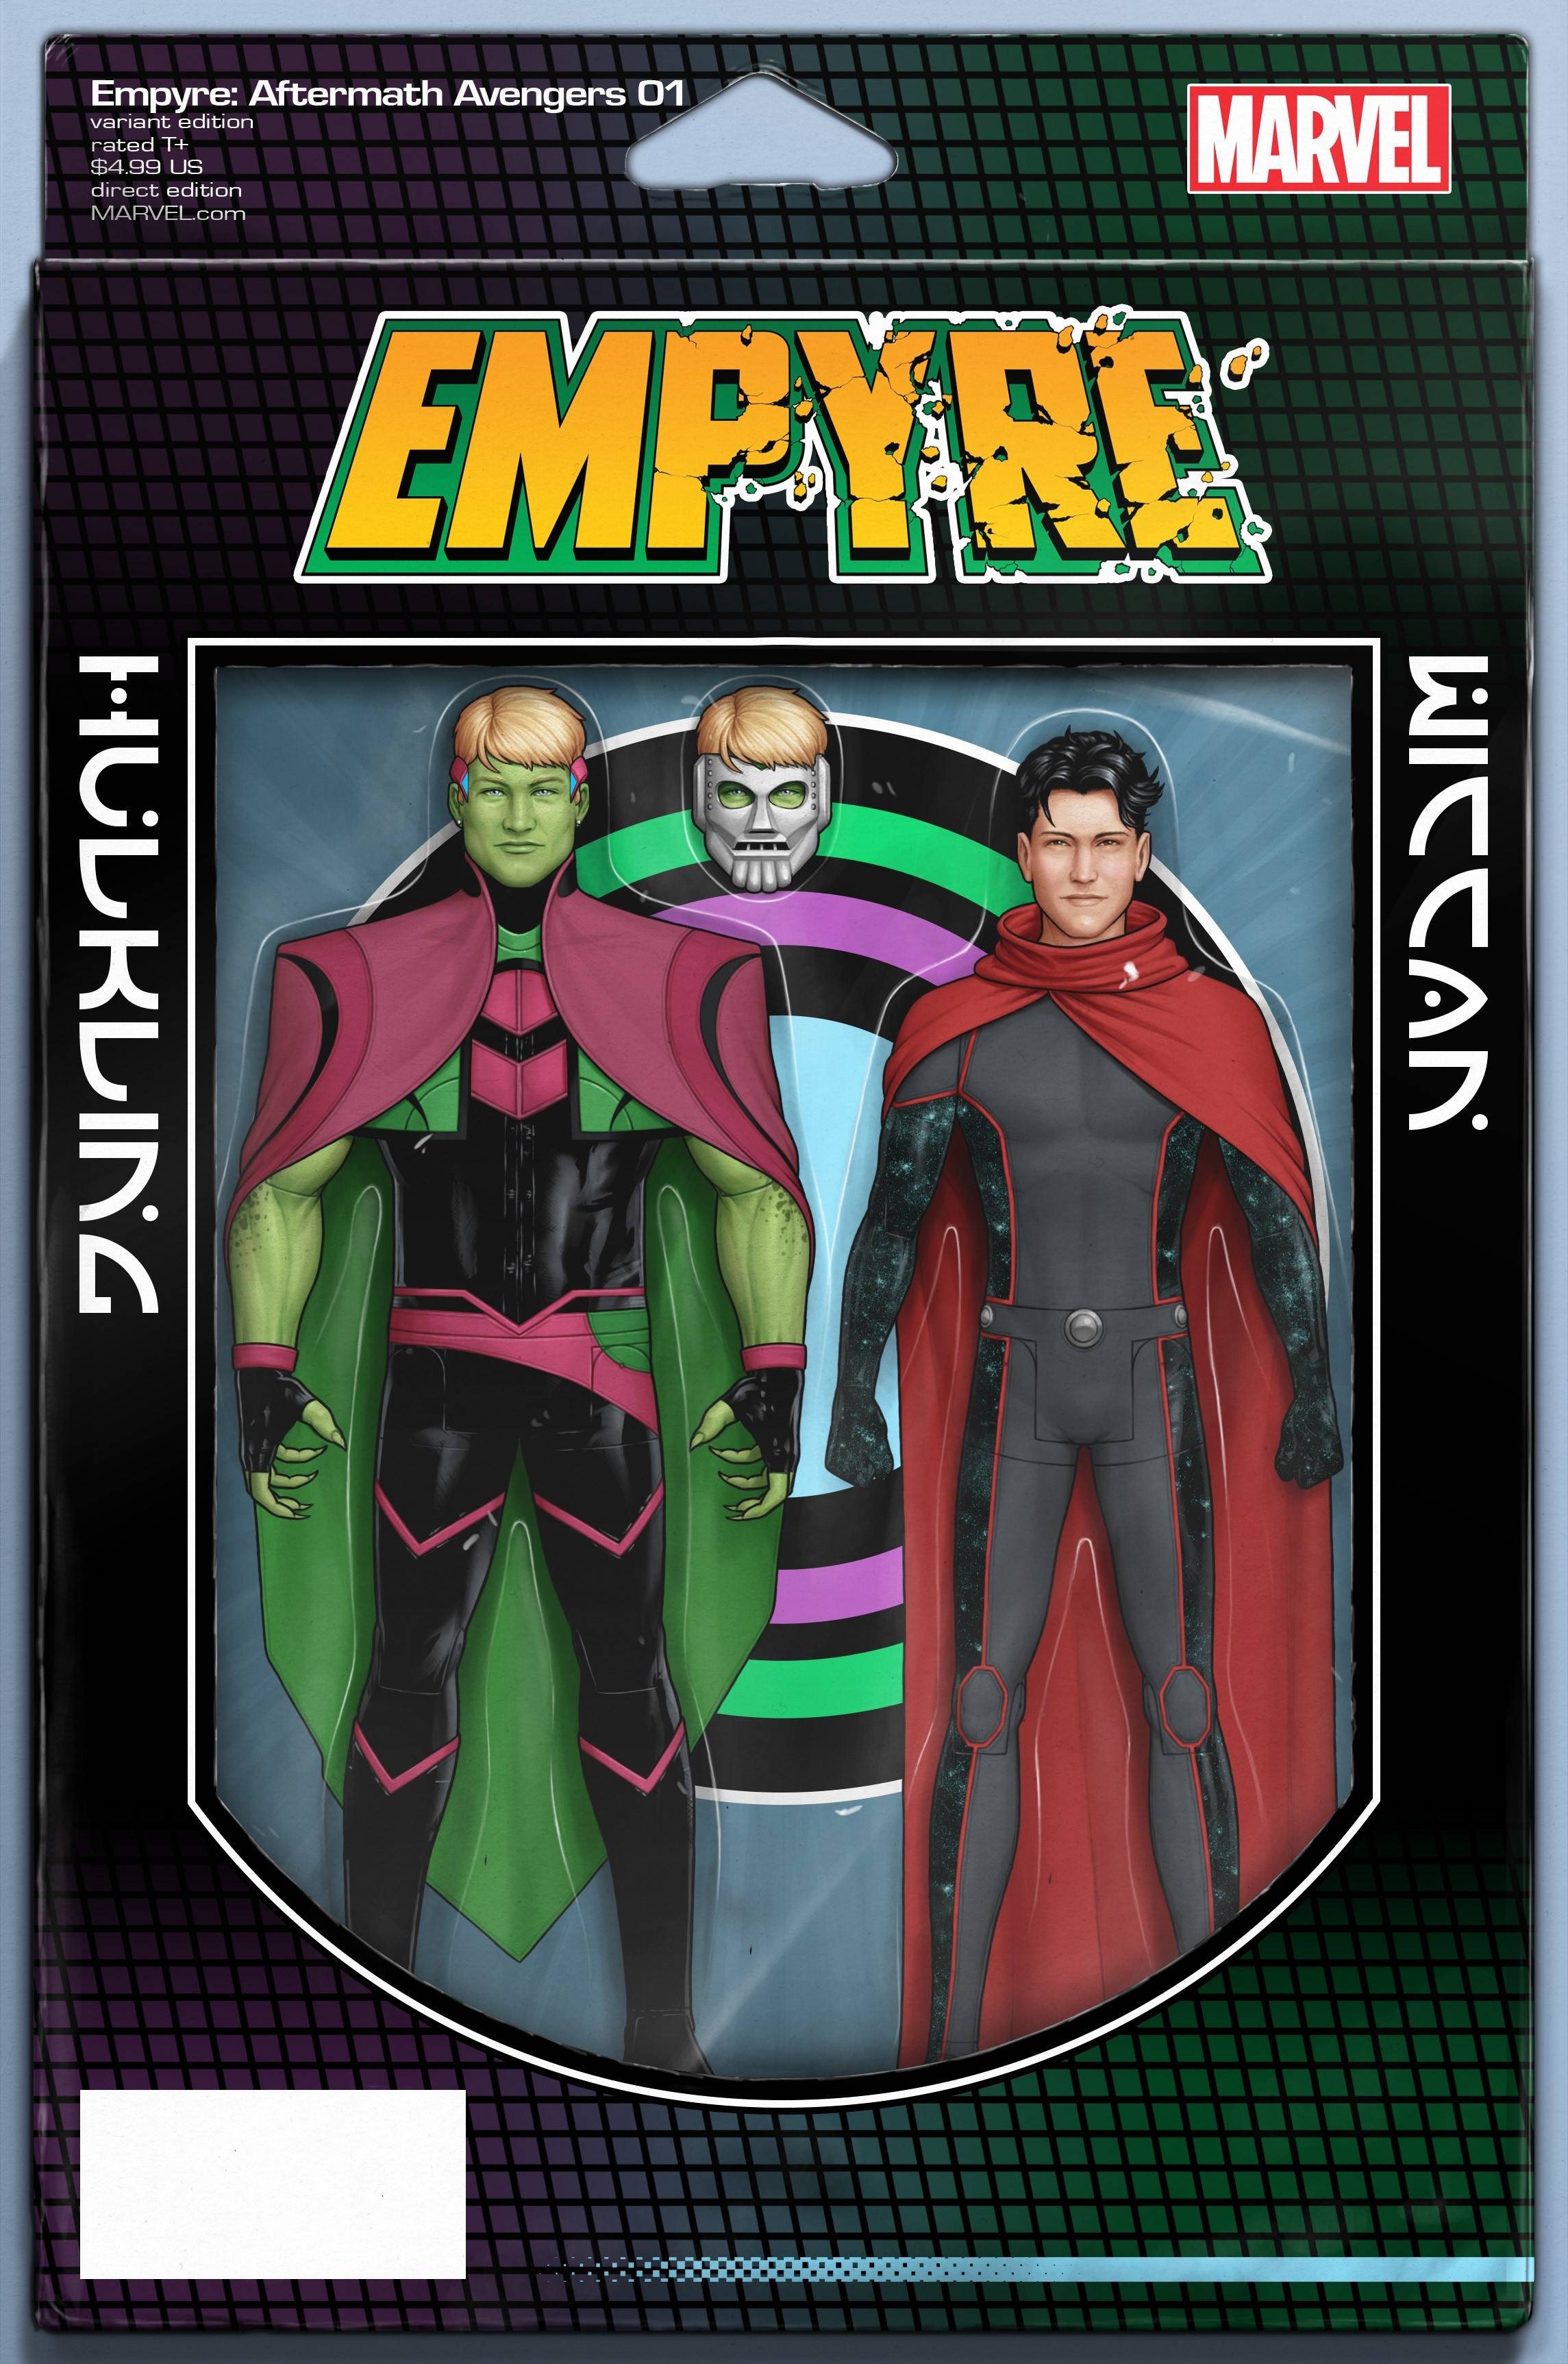 Empyre Aftermath Avengers #1 Christopher Action Figure Variant